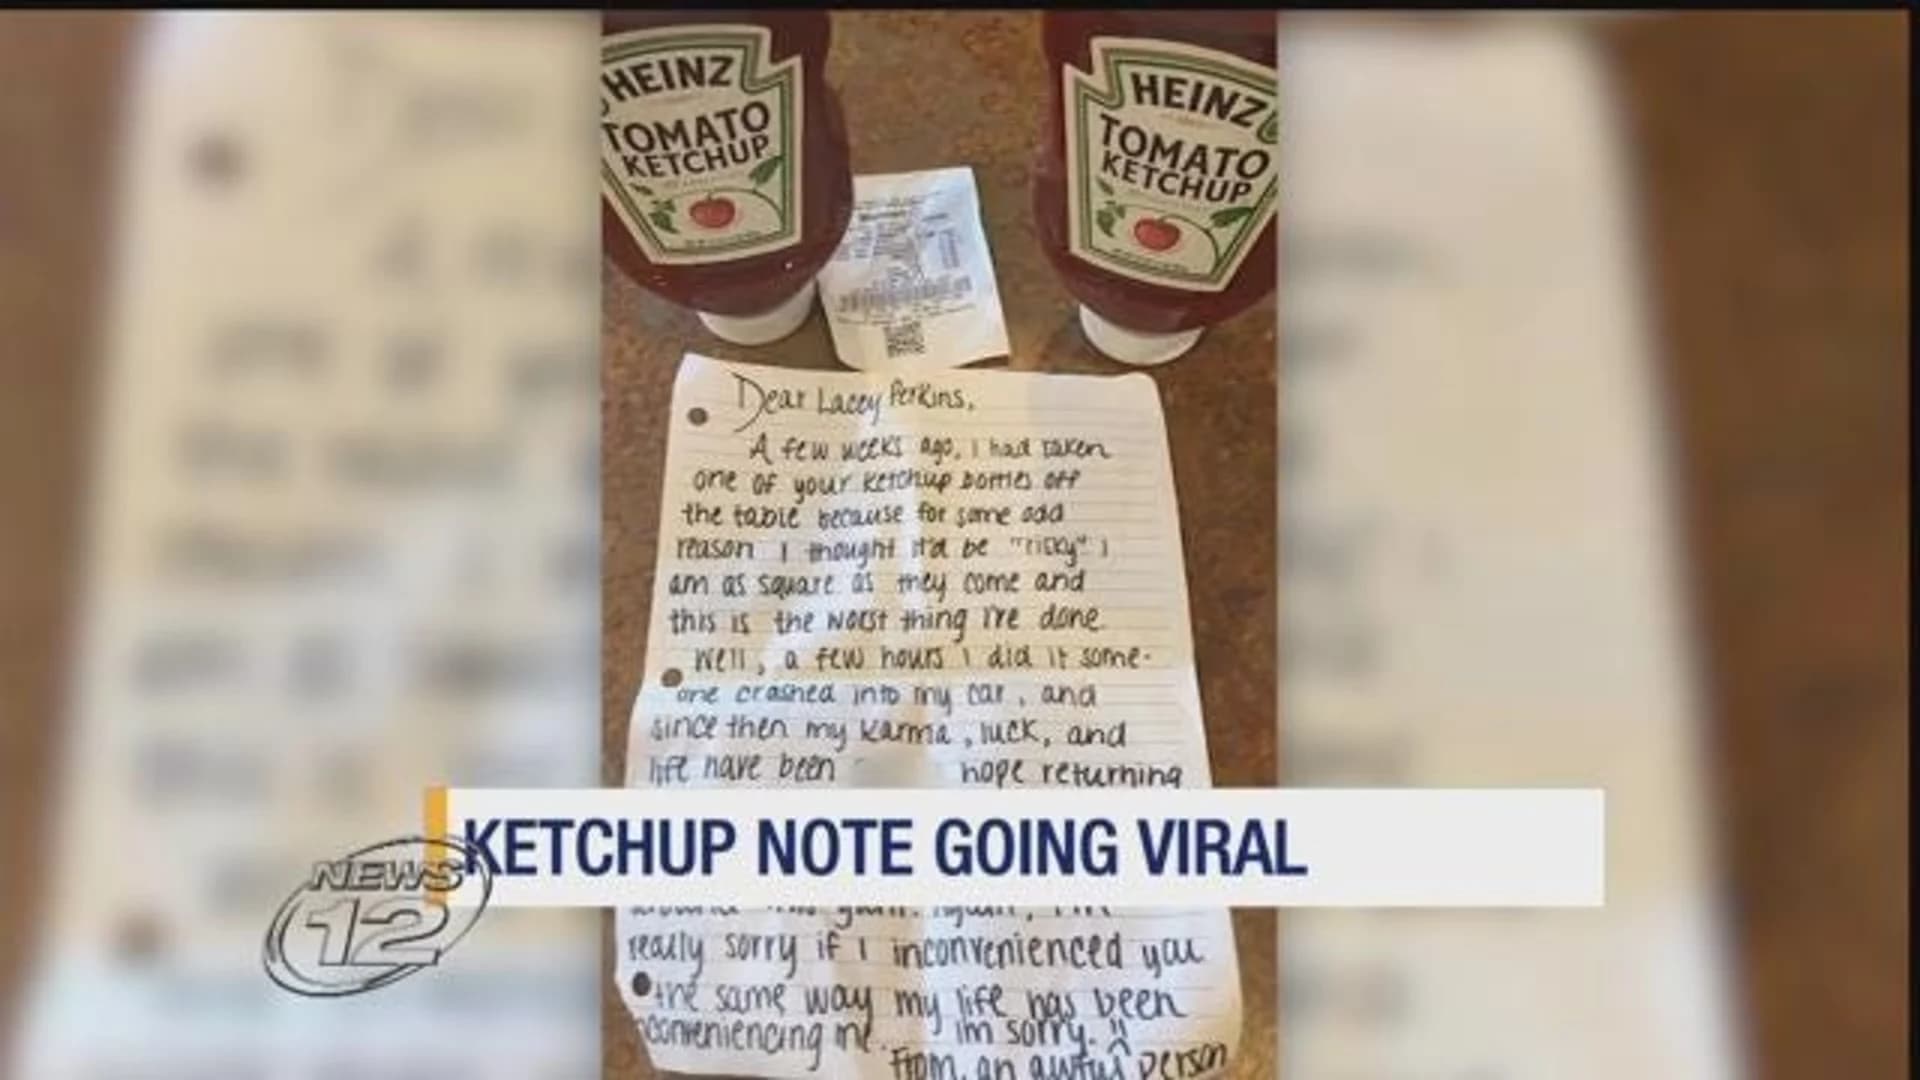 Heinz helping person who returned stolen ketchup